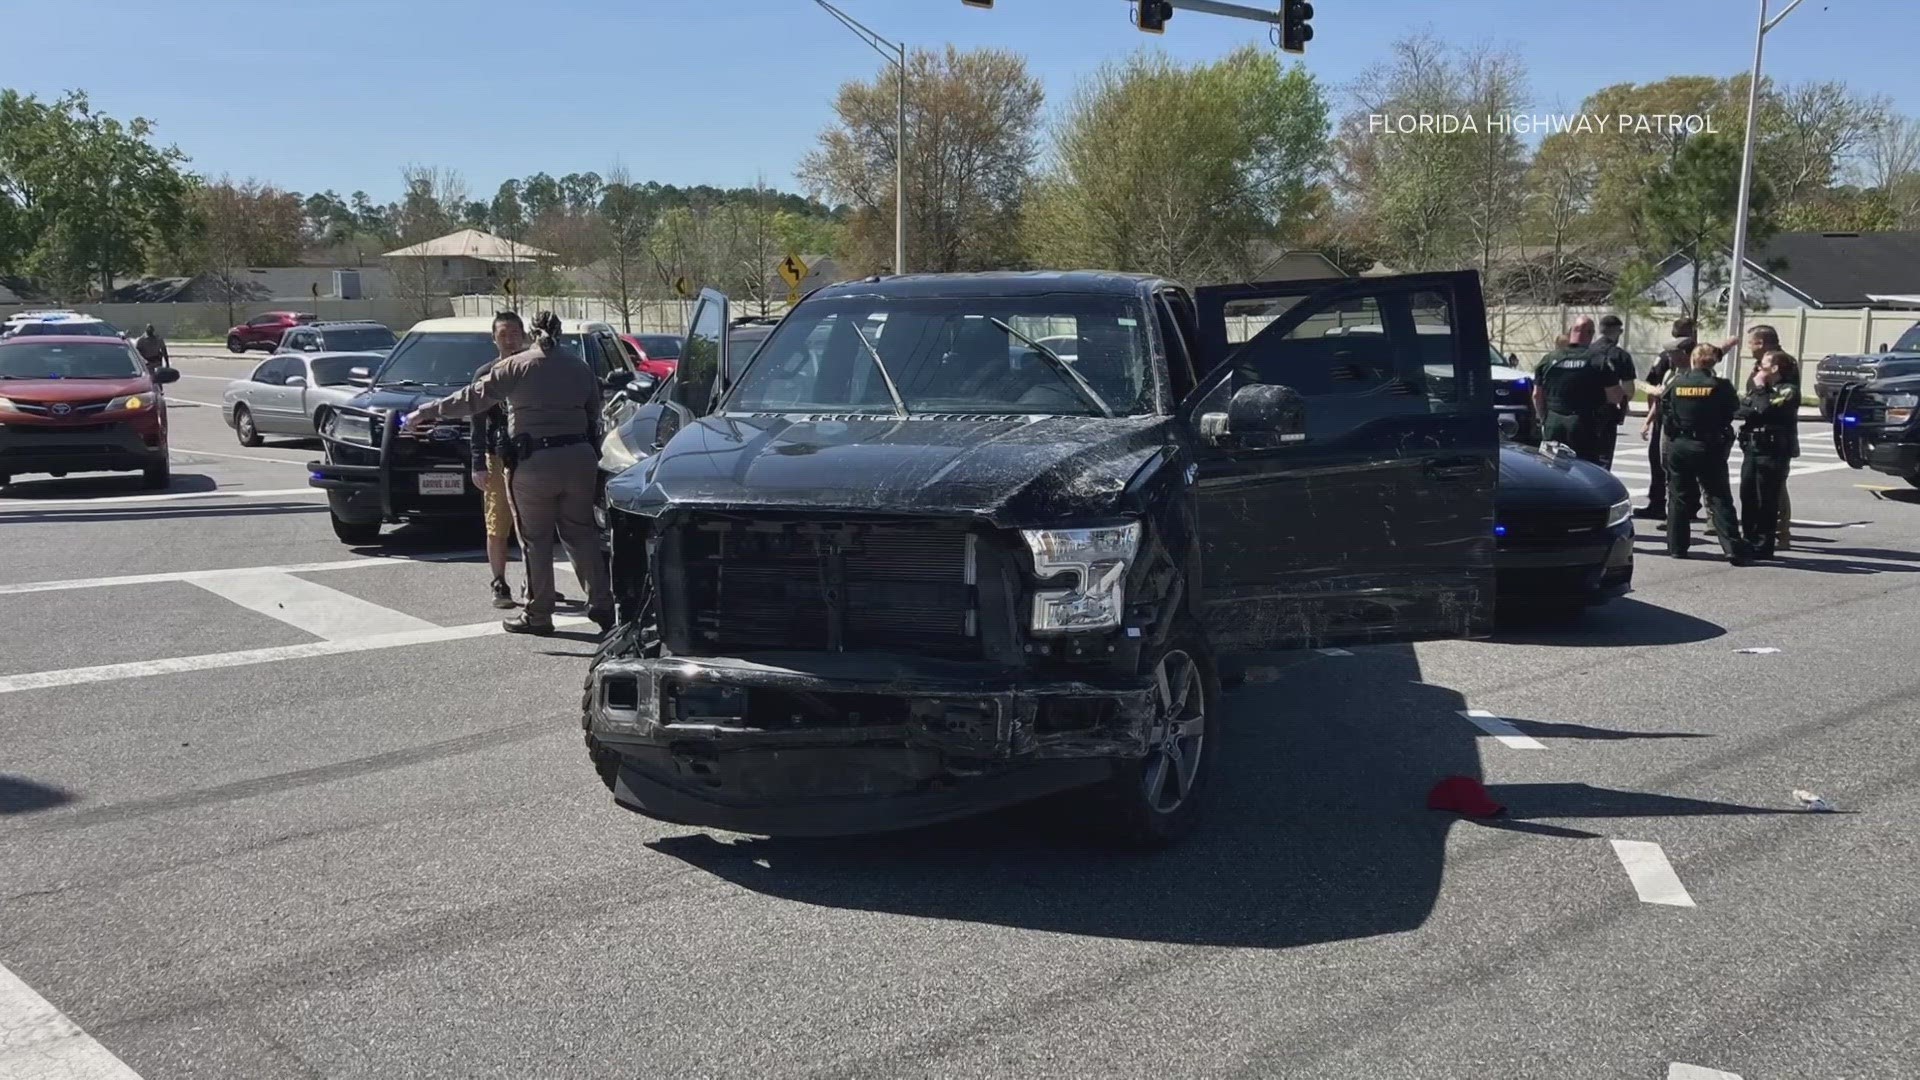 Clay County Sheriff's Office said the suspect "purposely" crashed into a deputy's vehicle and several others following a pursuit near Blanding Blvd and Collins Road.